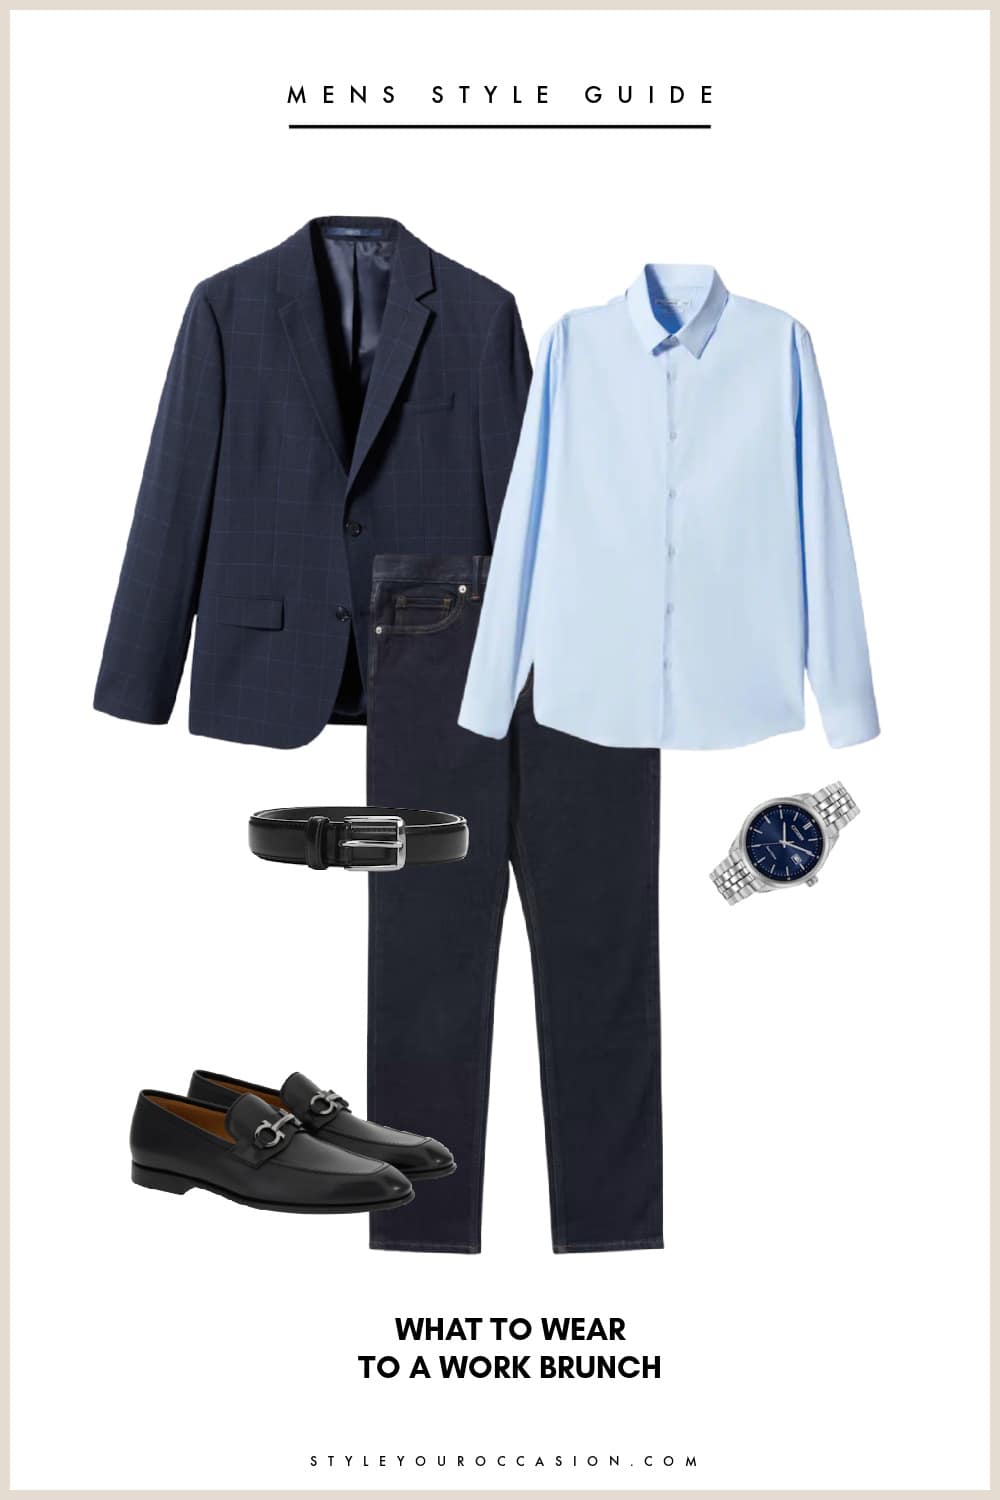 An image board of a men's work brunch outfit with dark blue jeans, a light blue button-up, a dark blue blazer, black loafers, a black belt, and a silver watch